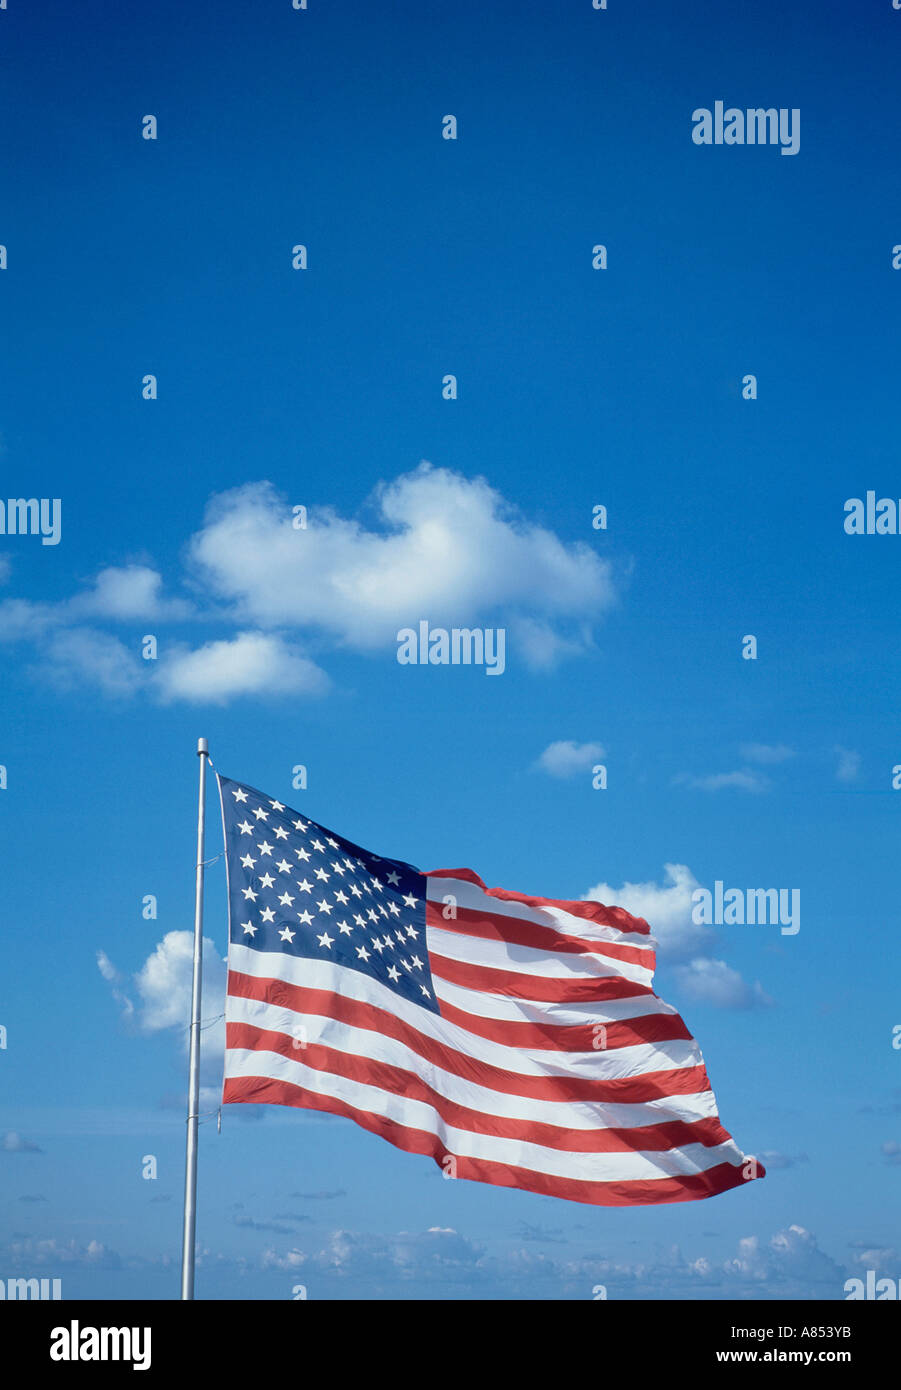 Stars and stripes. National flag of the United Staes of America. Stock Photo